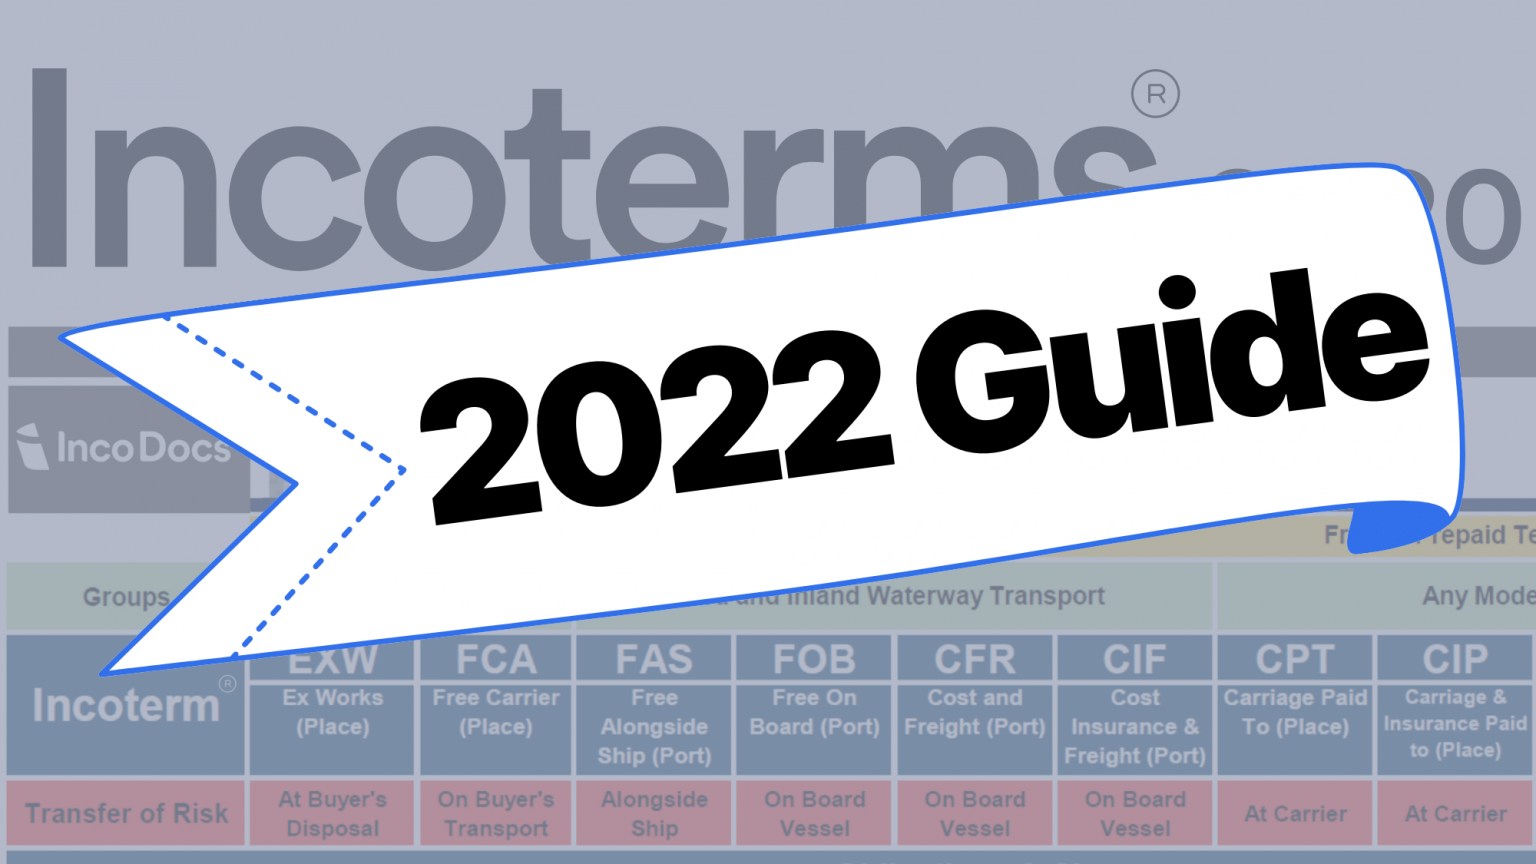 Incoterms® 2020 Explained The Complete Guide Incodocs 0550